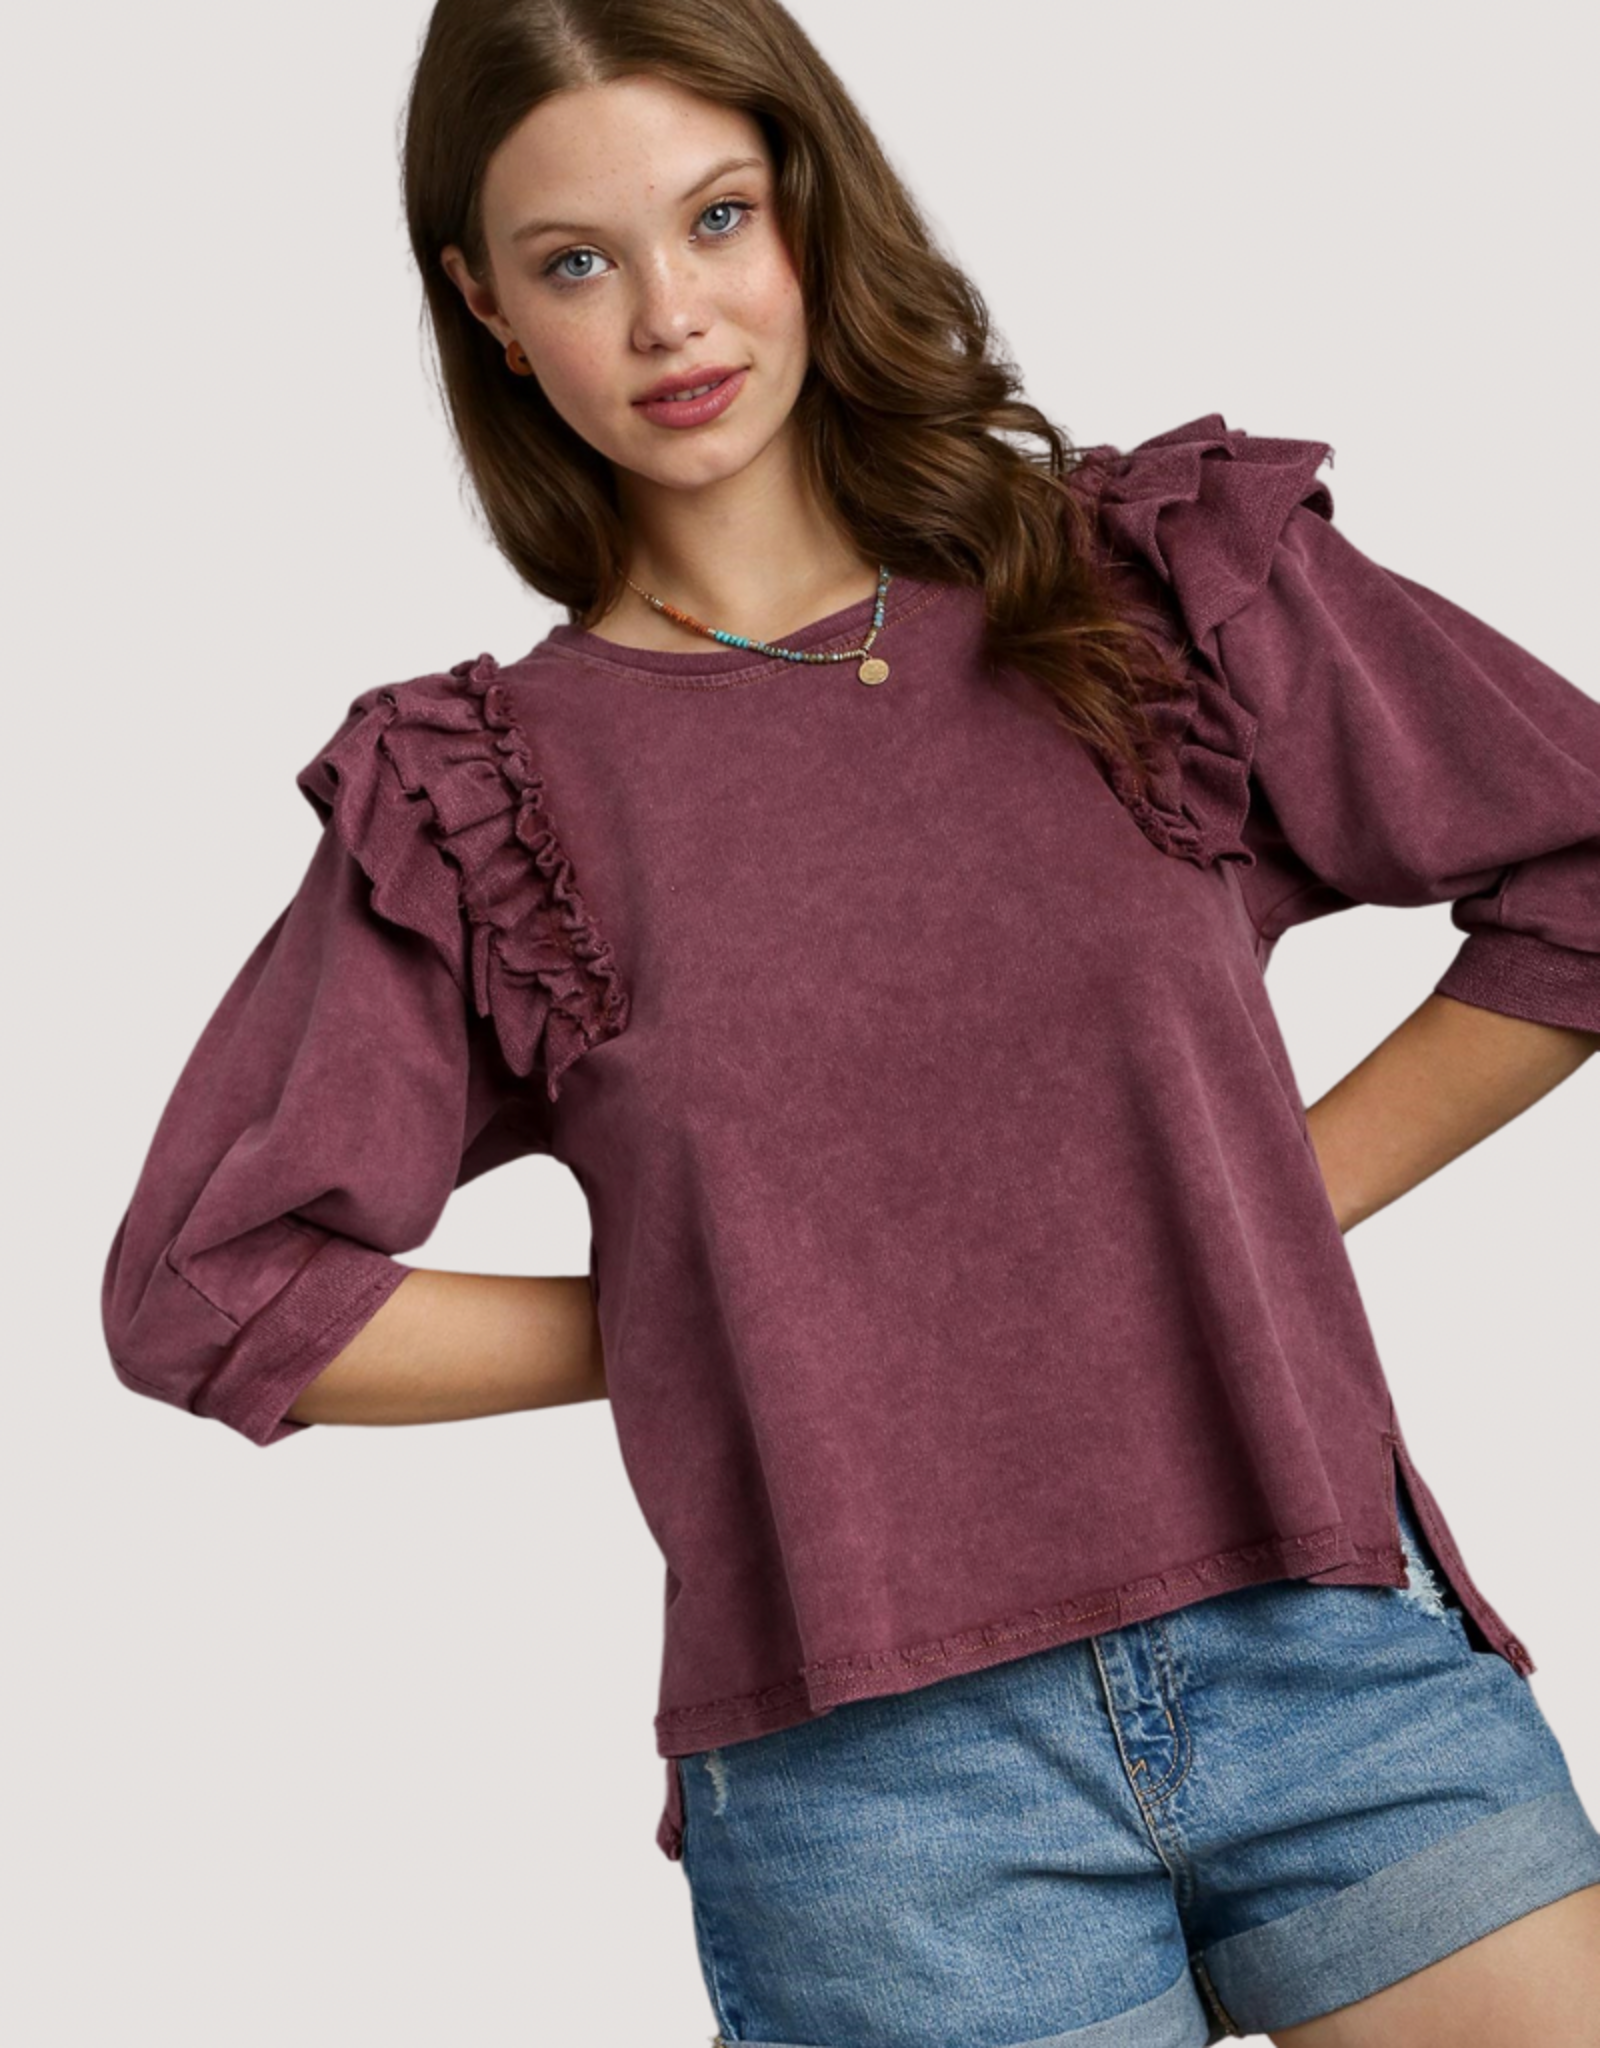 Mineral Wash French Terry Top